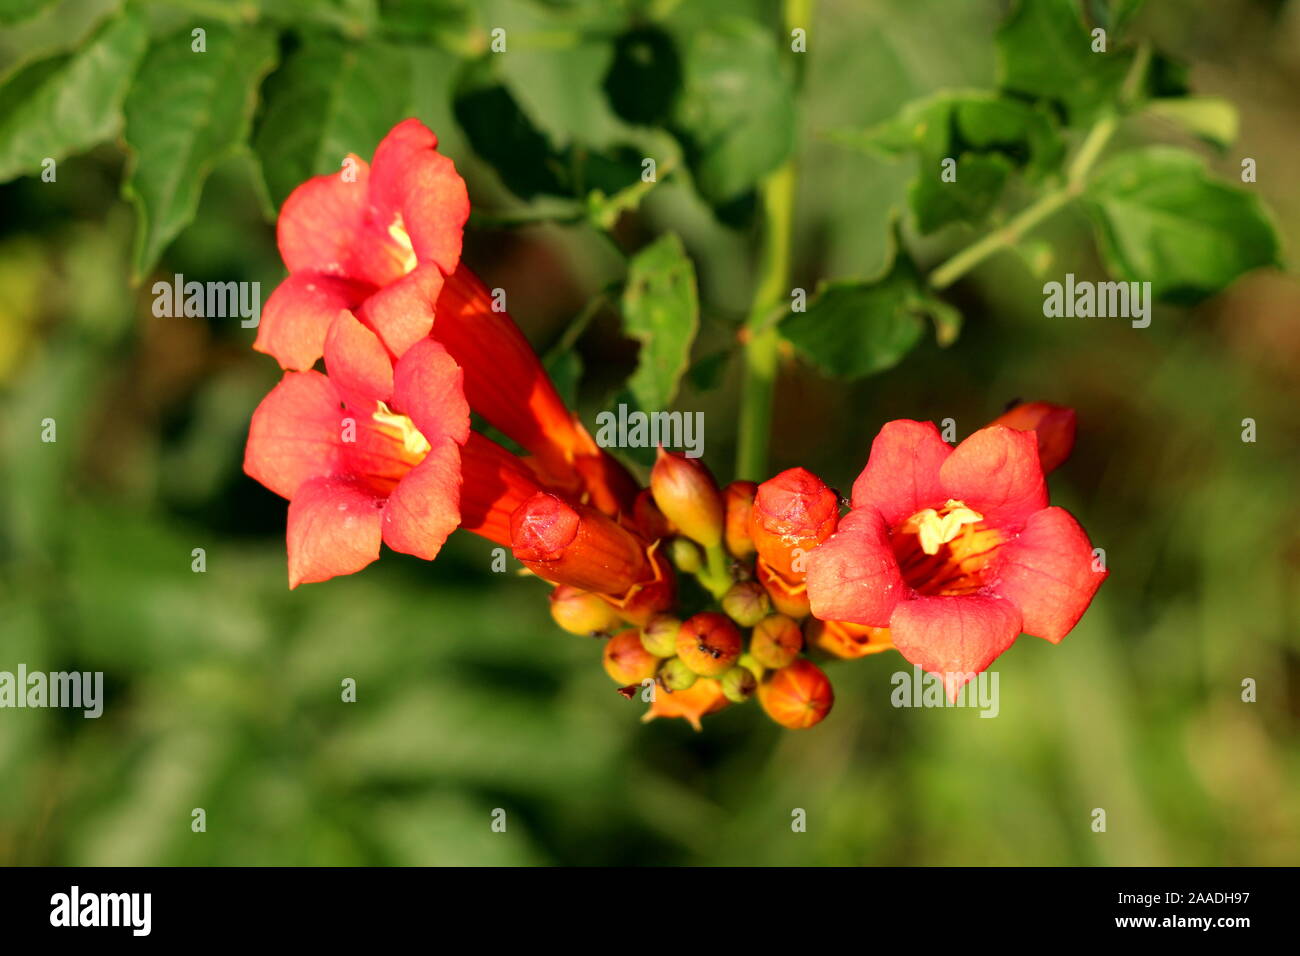 Bunch of Trumpet vine or Campsis radicans or Trumpet creeper or Cow itch vine or Hummingbird vine flowering deciduous woody vine plant Stock Photo